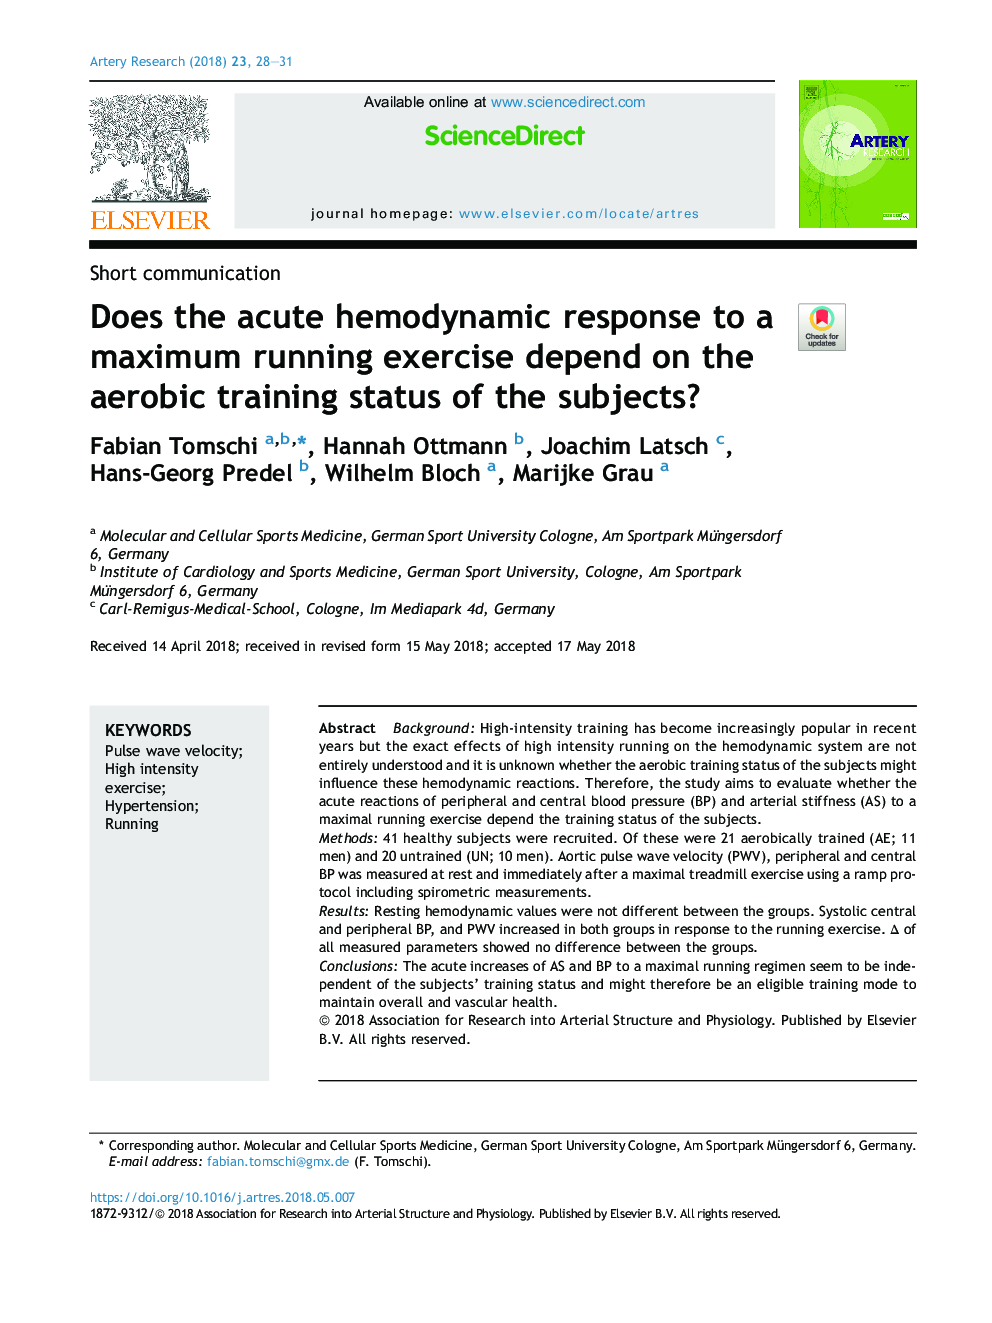 Does the acute hemodynamic response to a maximum running exercise depend on the aerobic training status of the subjects?